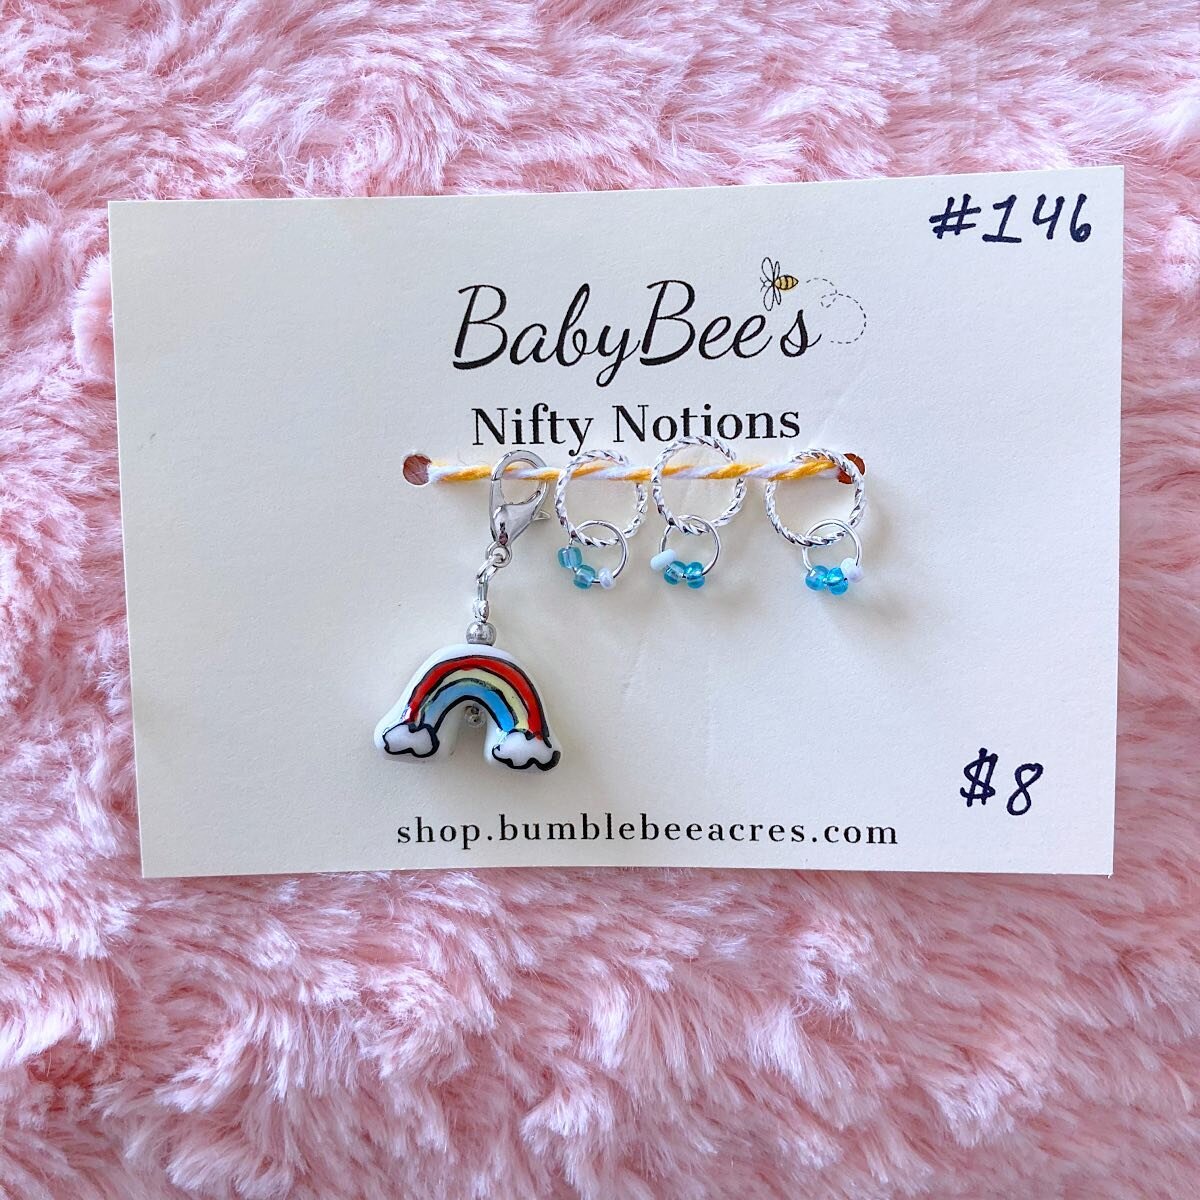 🌈 Rainbow Notions sets with matching blue sky stitch markers☘️

Perfect for spring and St. Patrick's Day🥰 And made by our very own Baby🐝! 

Wishing you all a very pleasant Thursday evening 💖 -Sam🐝